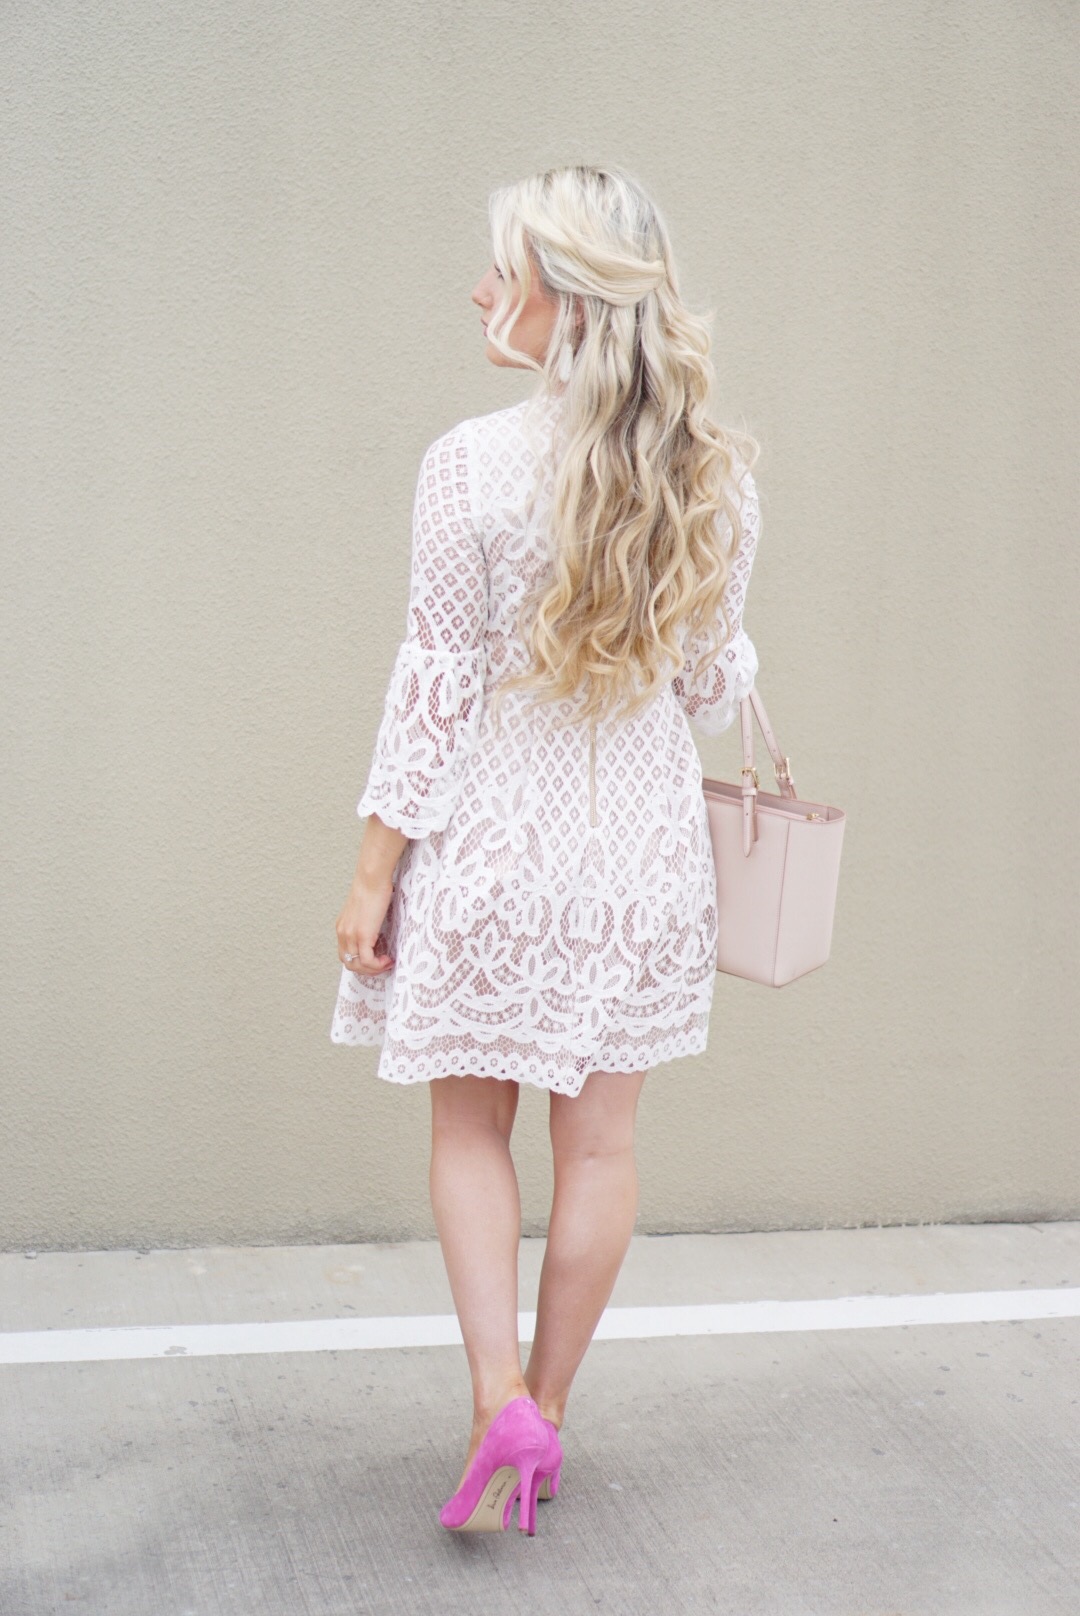 How to Wear a White Lace Top to the Office